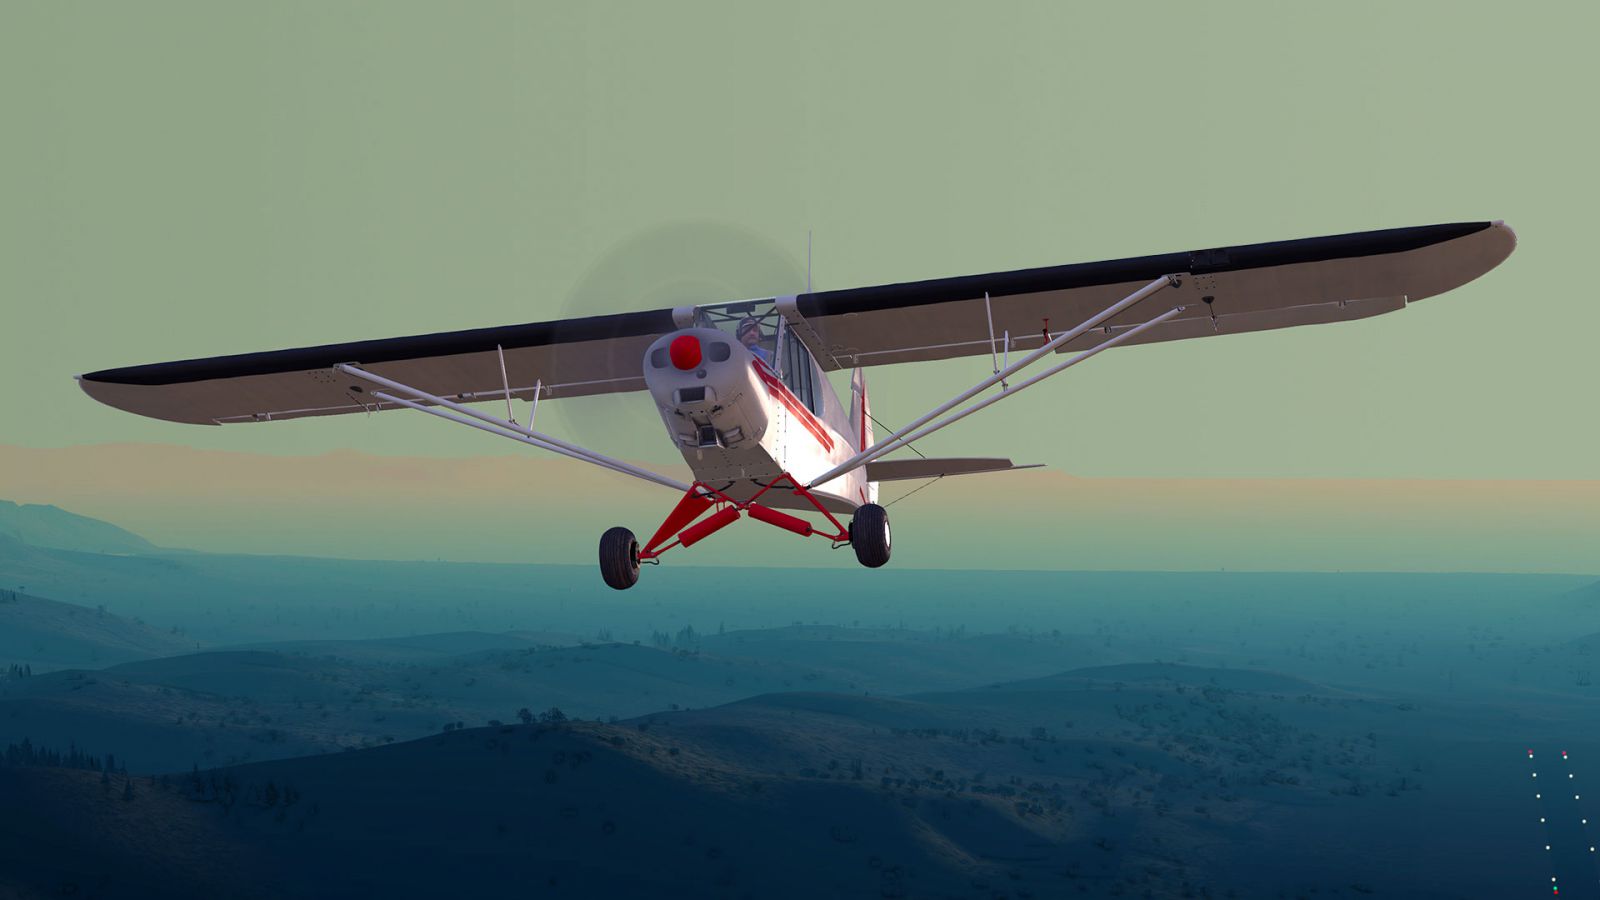 Microsoft Flight Simulator 2020 Review Bomb Caused by Long